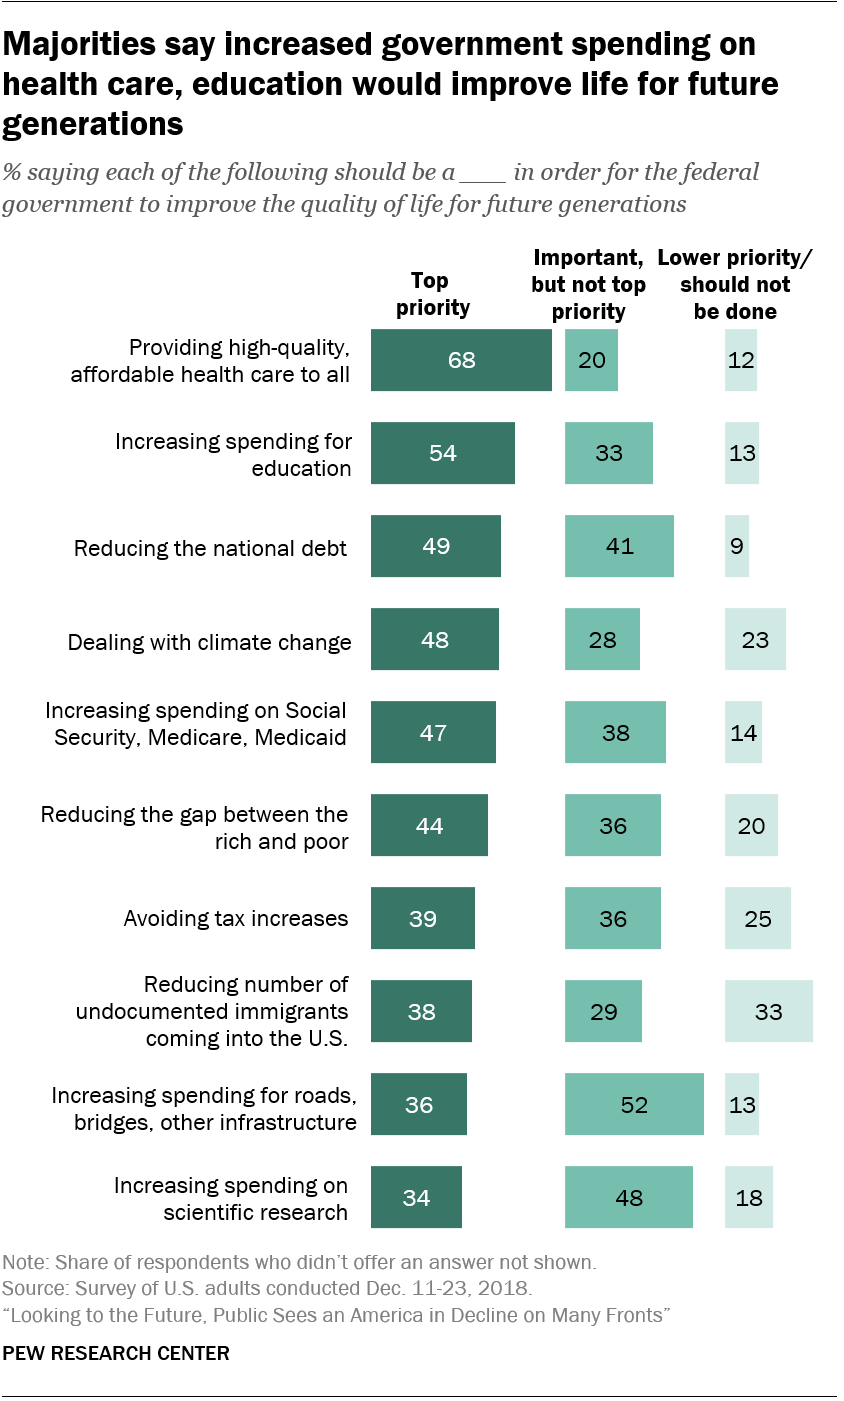 Majorities say increased government spending on health care, education would improve life for future generations